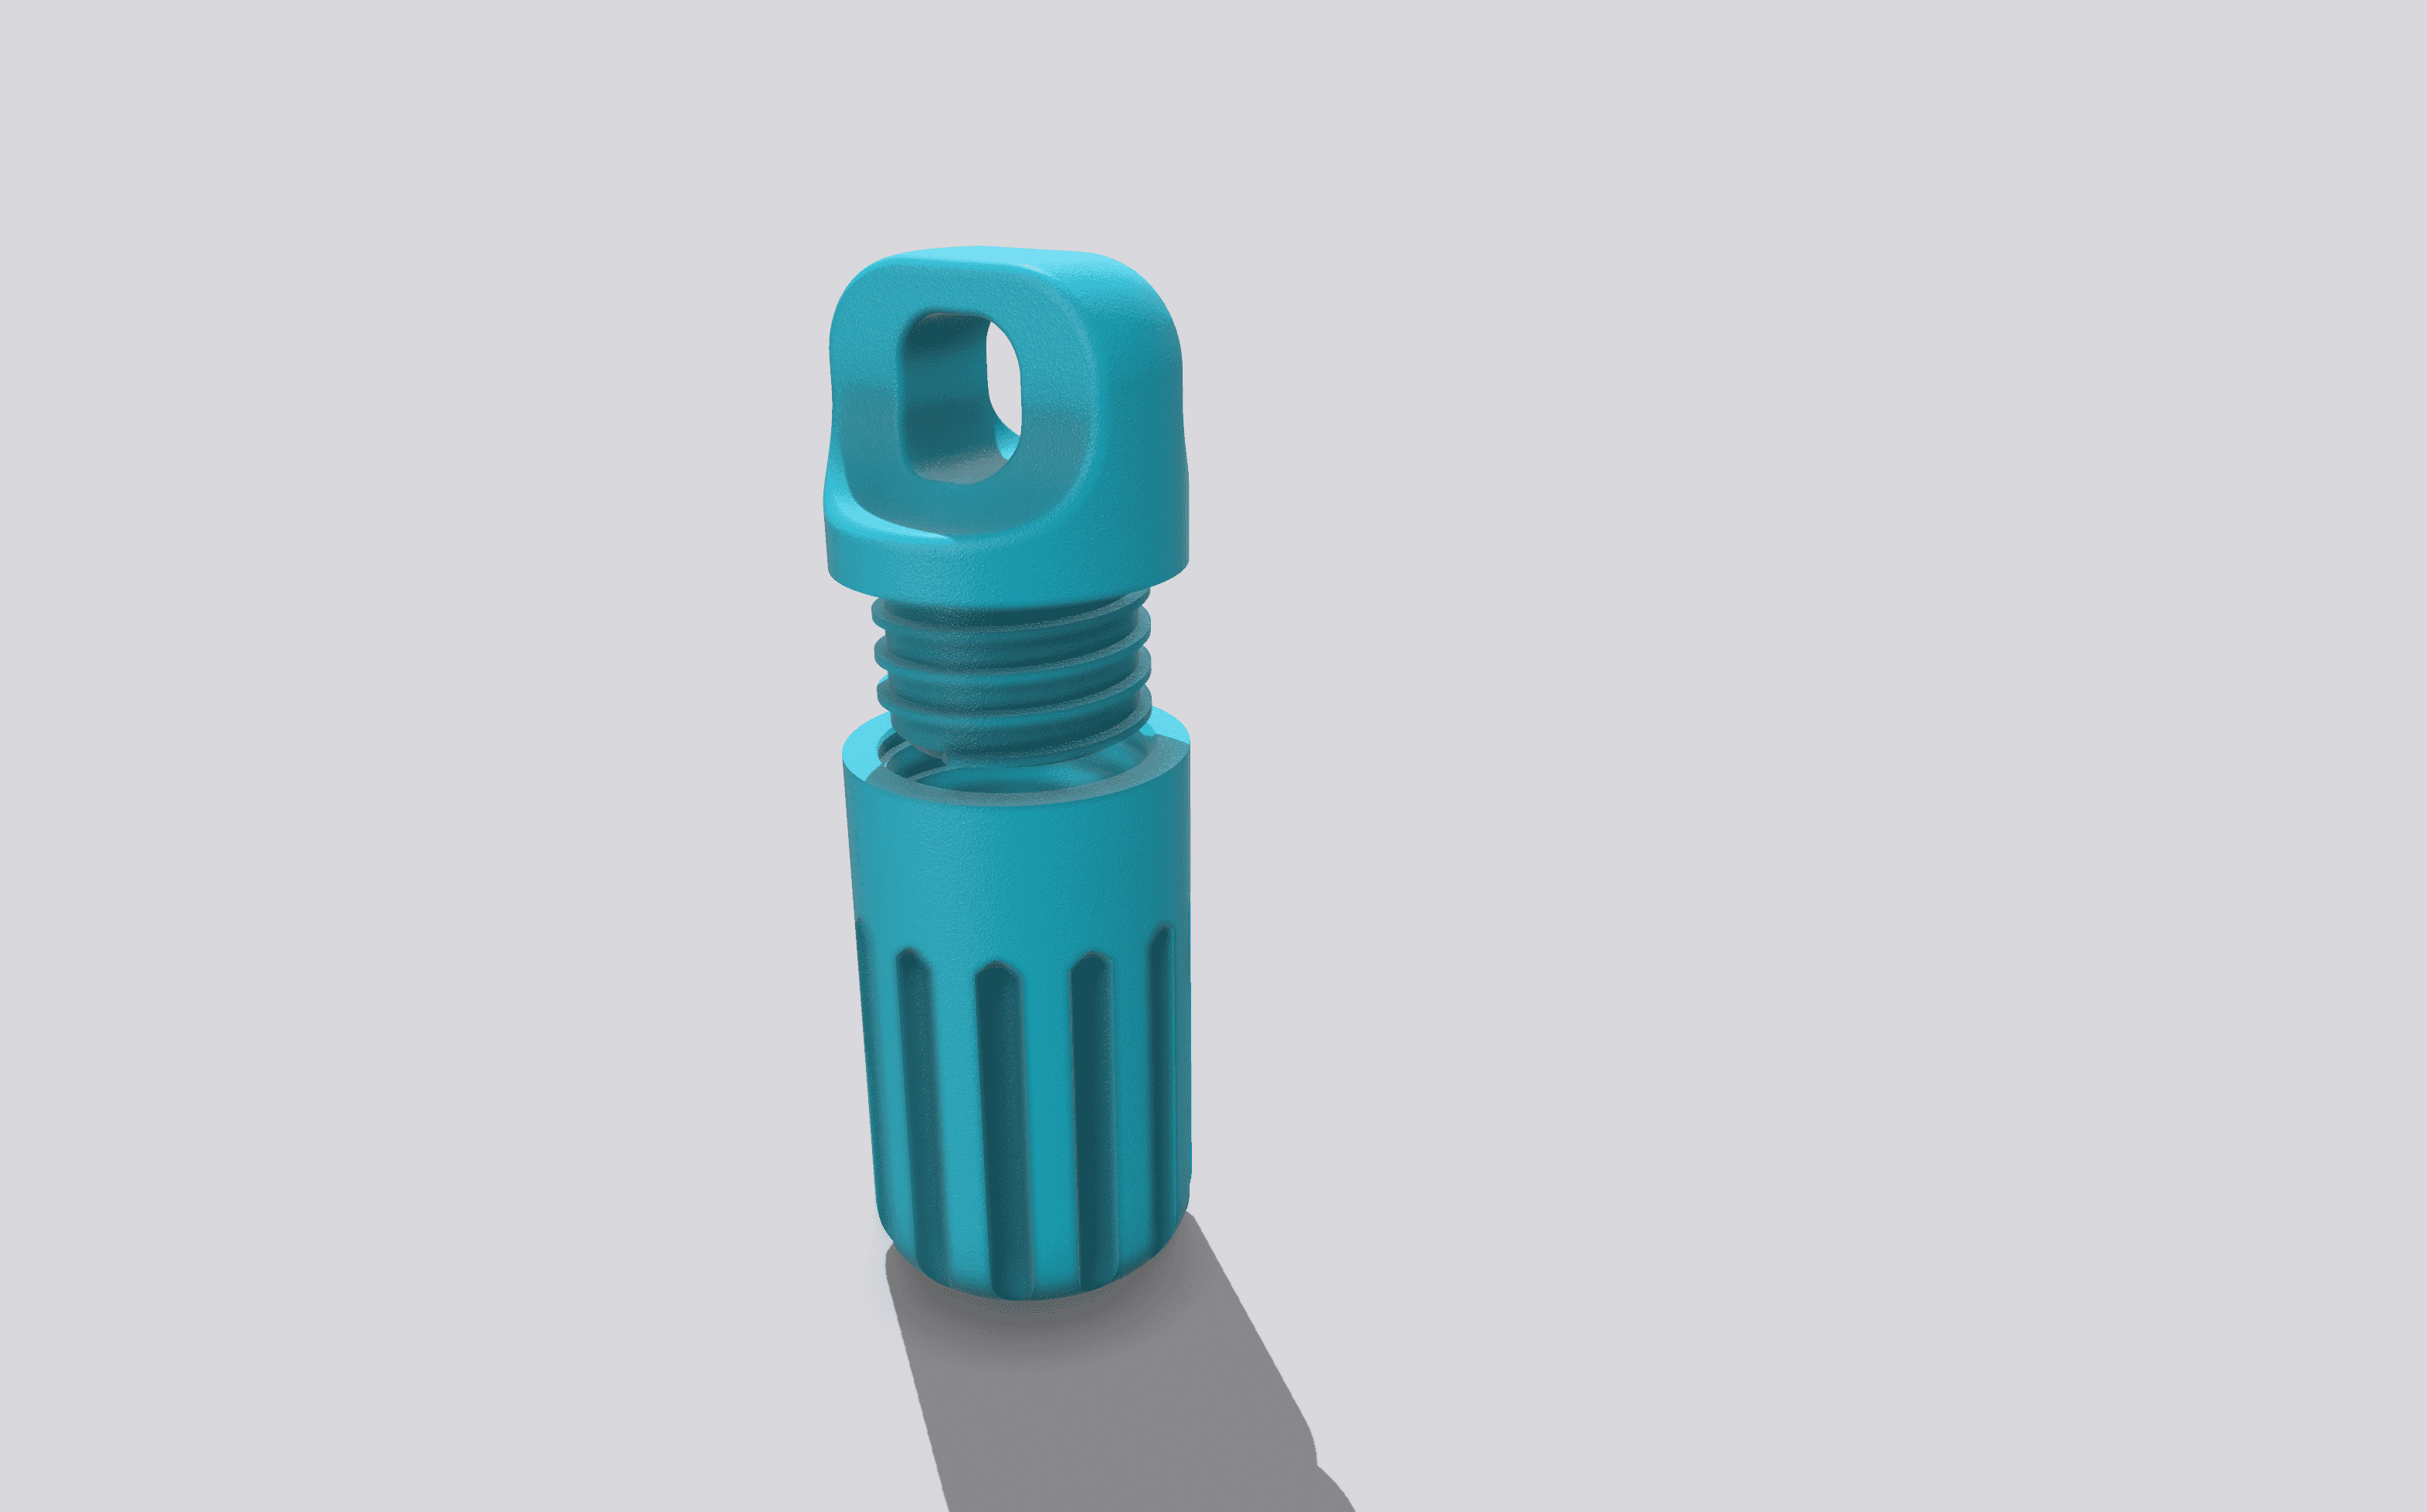 Small container for keychain 3d model